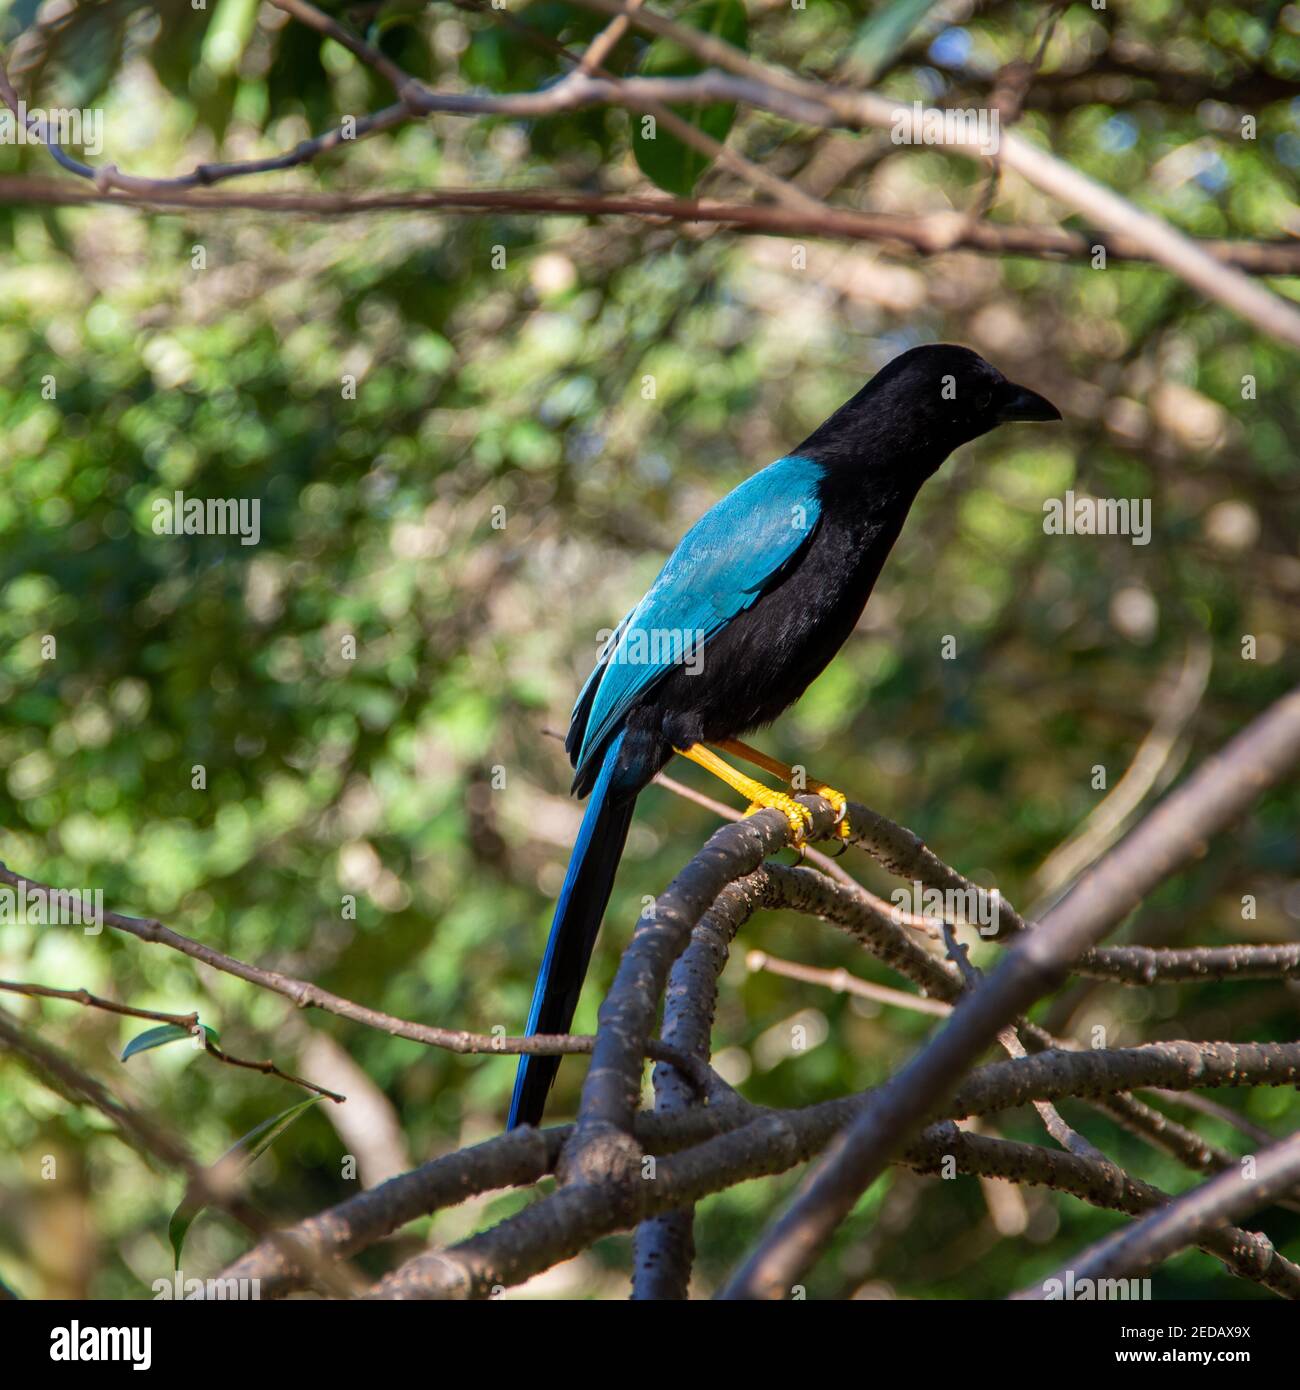 A mature Yucatan jay sitting on a branch in Tulum, Quintana Roo, Mexico Stock Photo